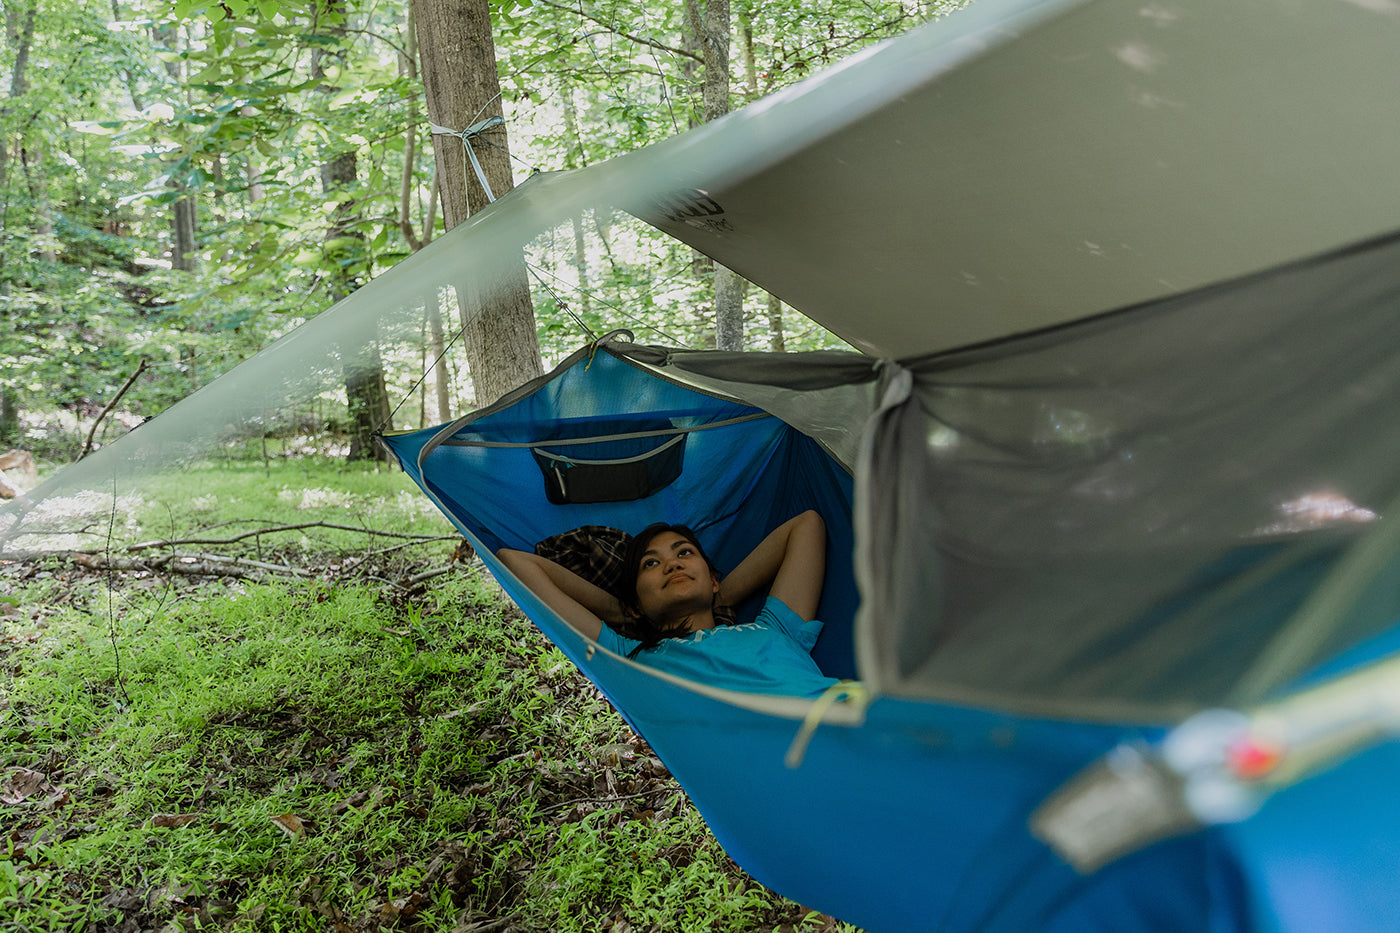 A woman lays in her SkyLite hammock protcted by a rain tarp while hammock camping